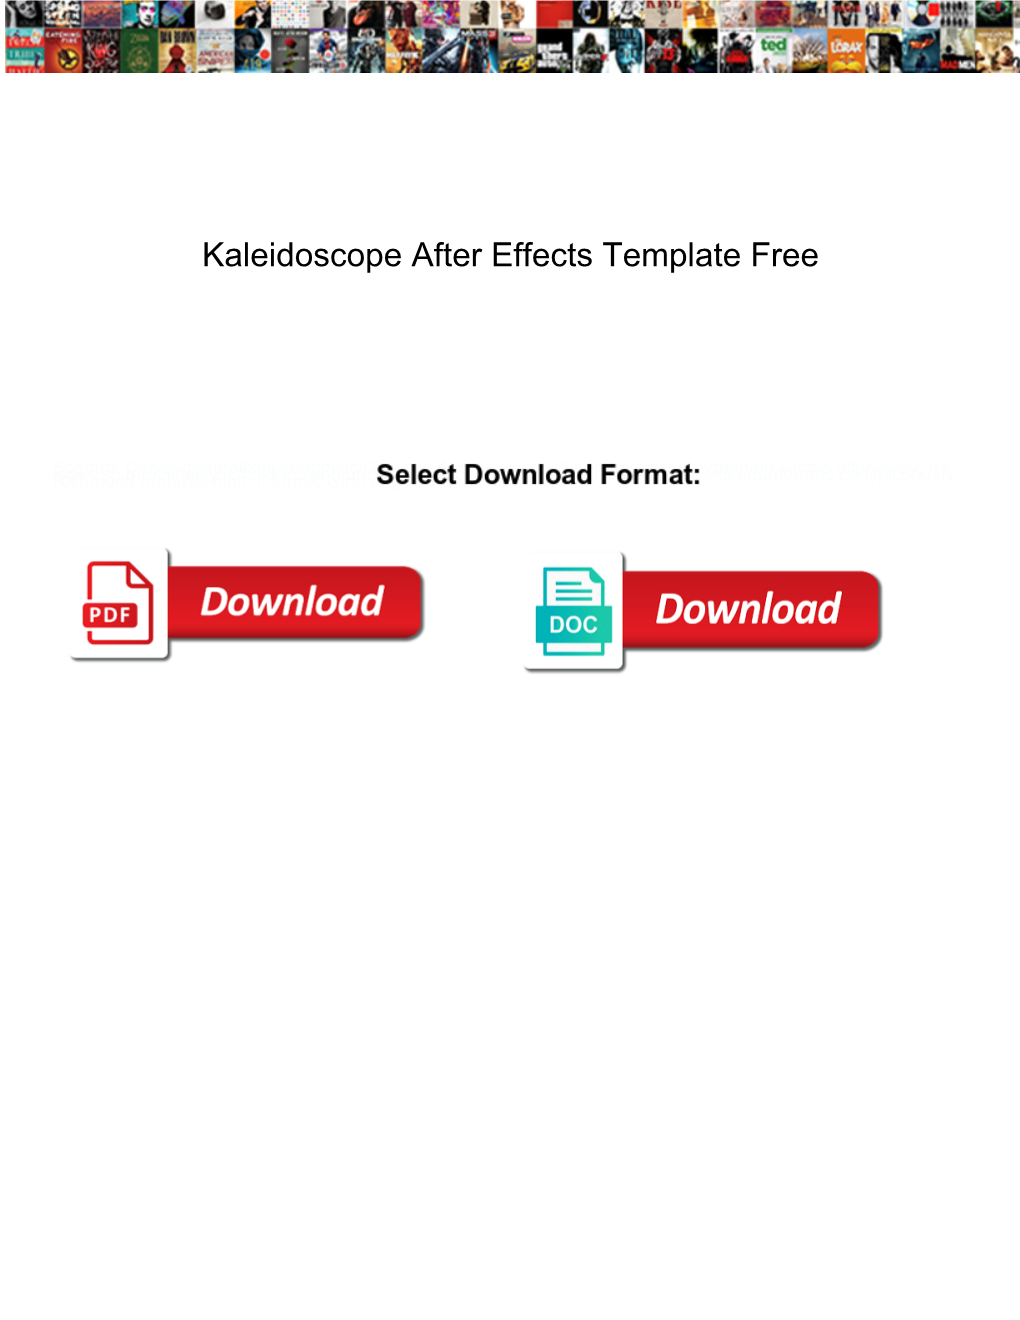 Kaleidoscope After Effects Template Free